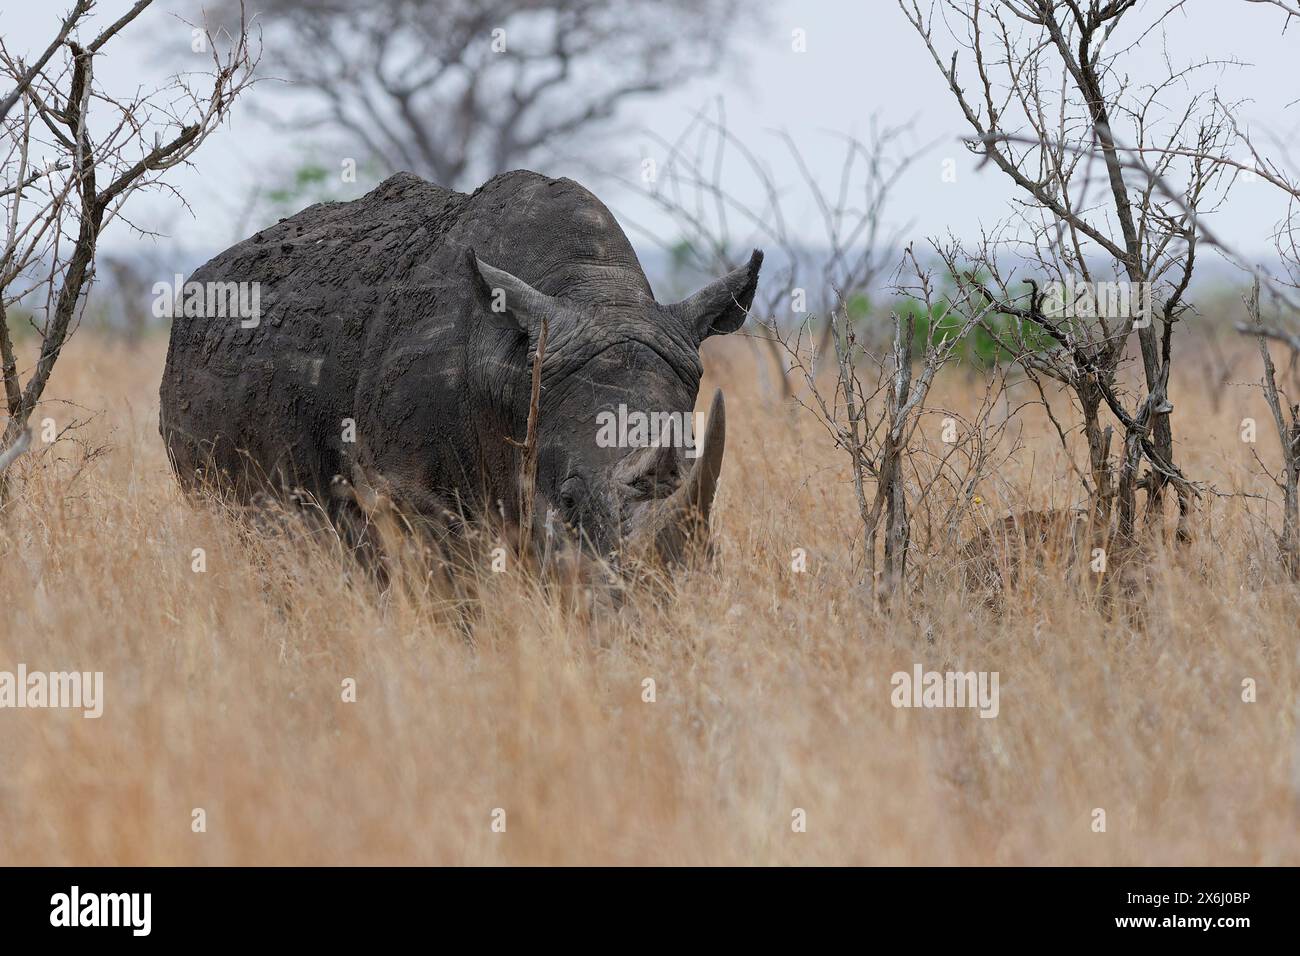 Southern white rhinoceros (Ceratotherium simum simum), adult animal foraging in the tall dry grass, Kruger National Park, South Africa, Africa Stock Photo